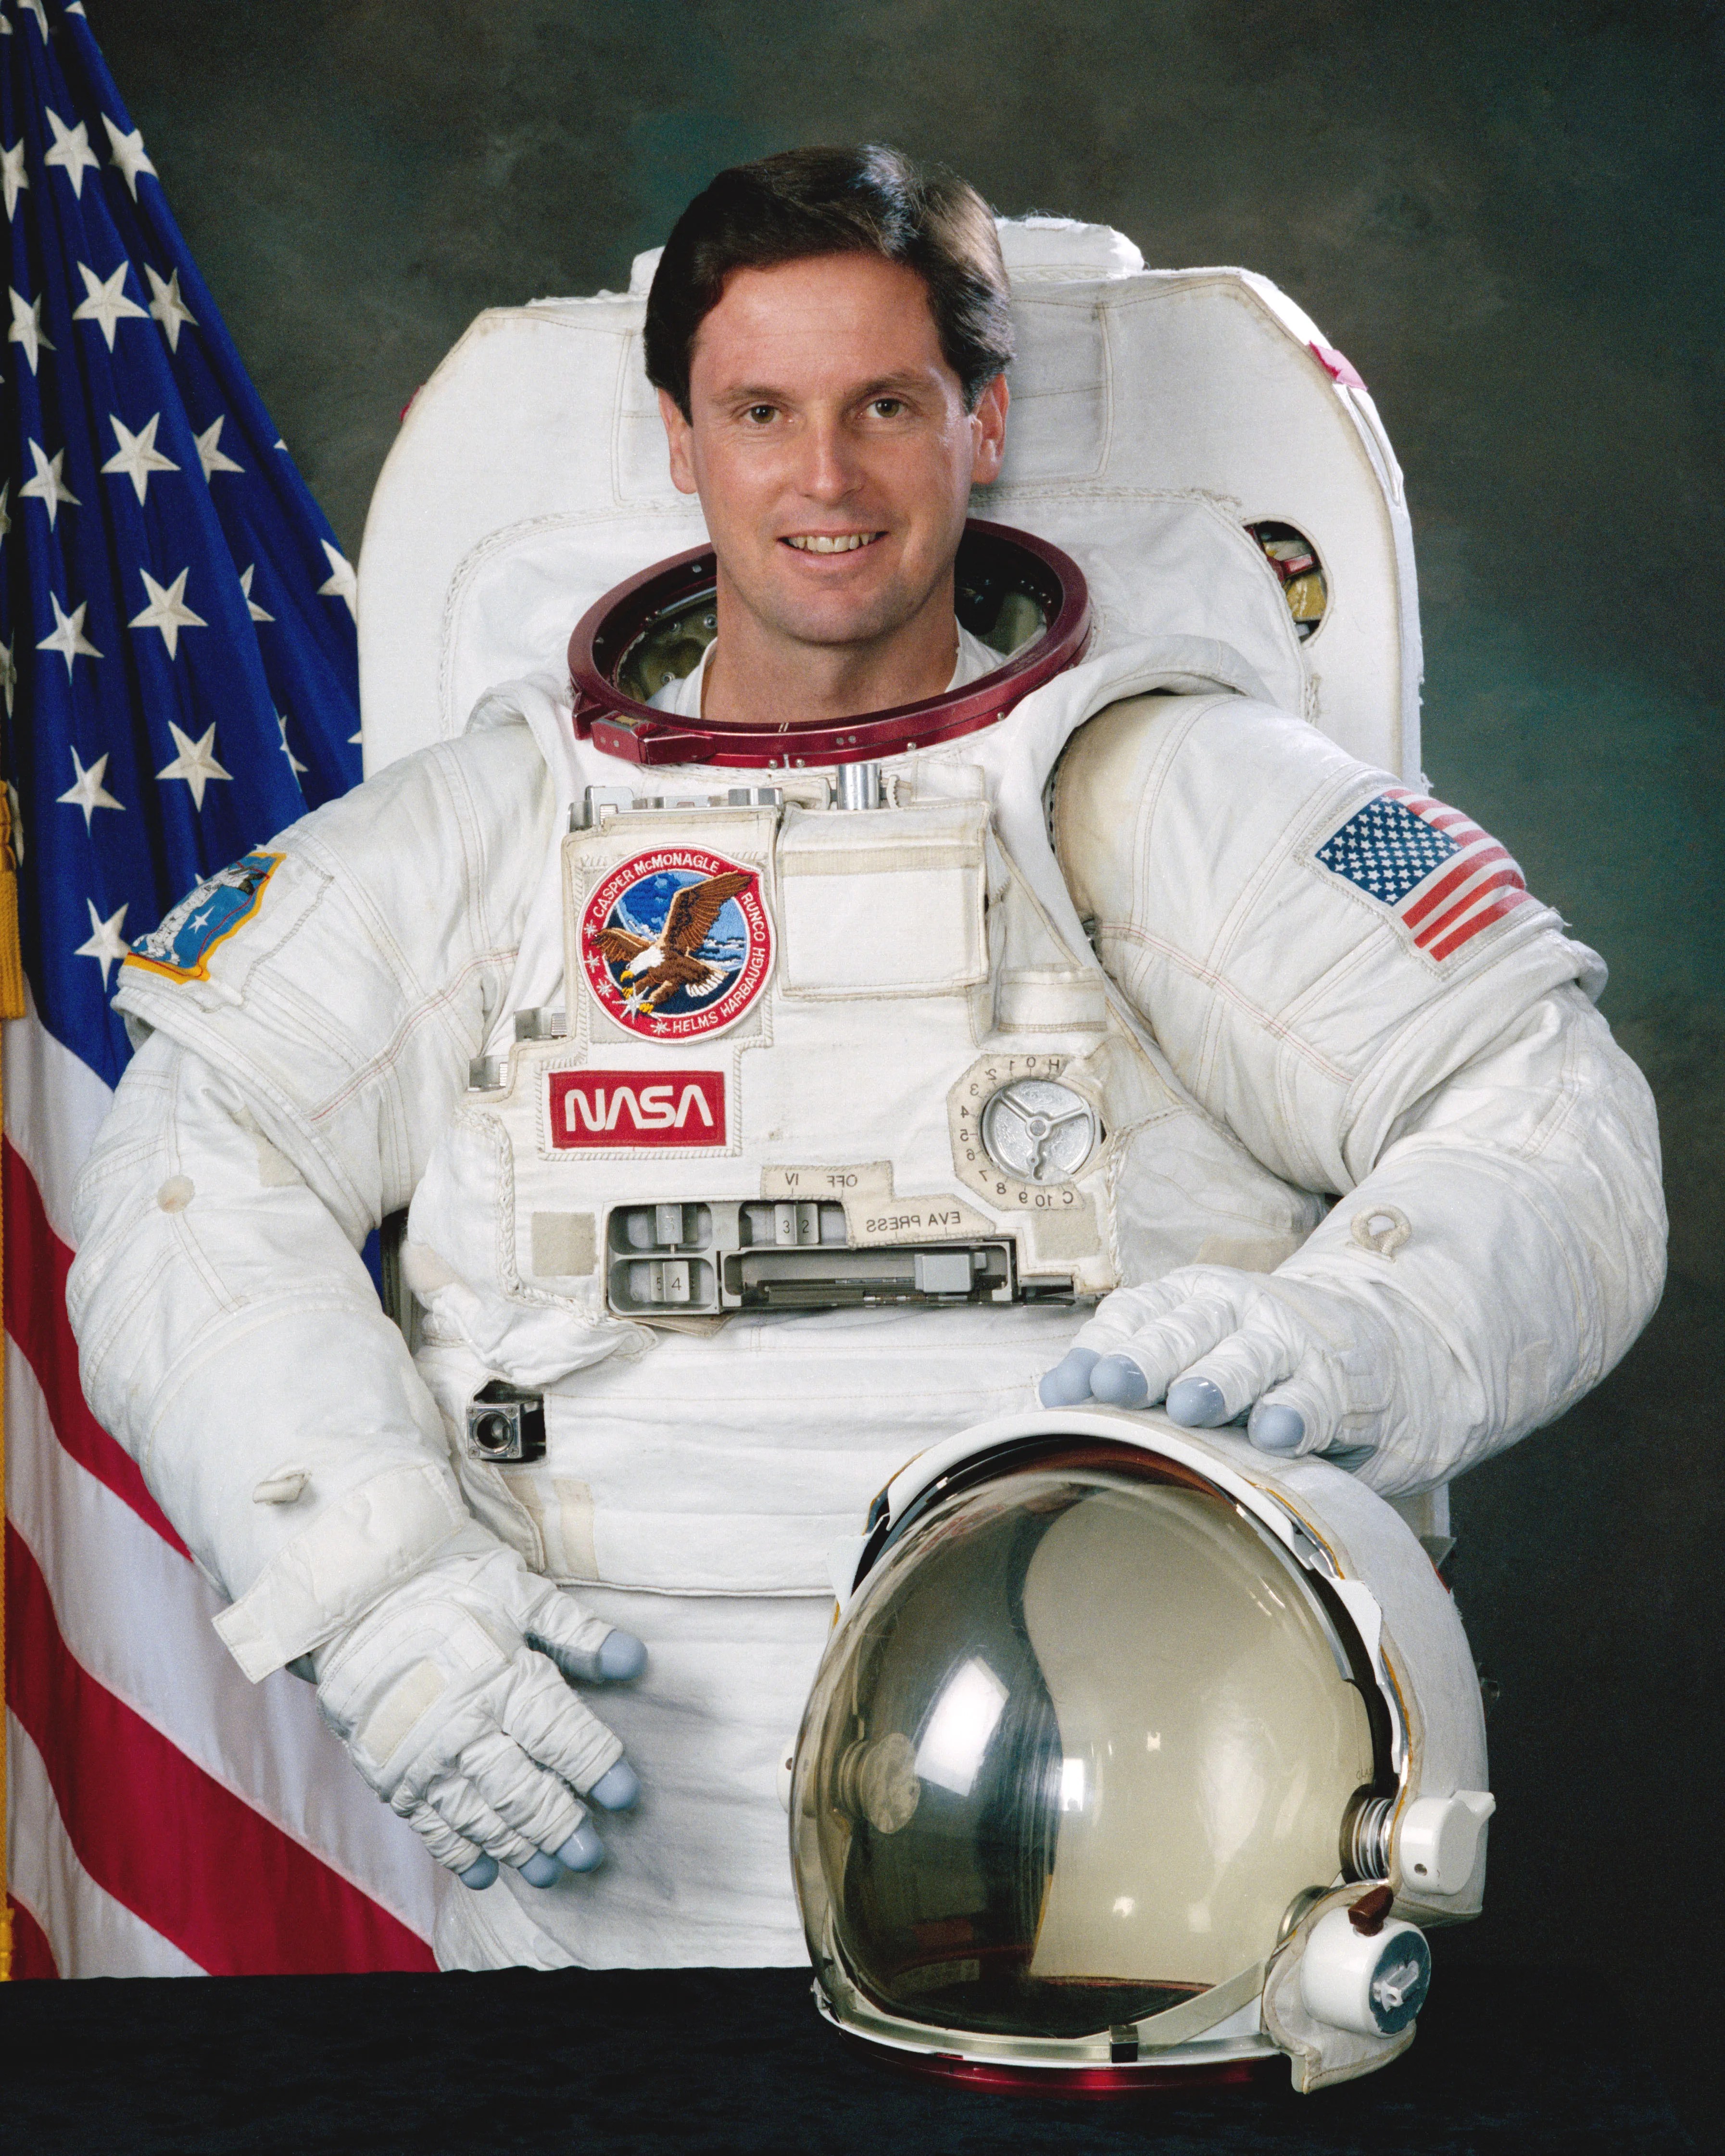 Official astronaut portrait of Gregory Harbaugh.